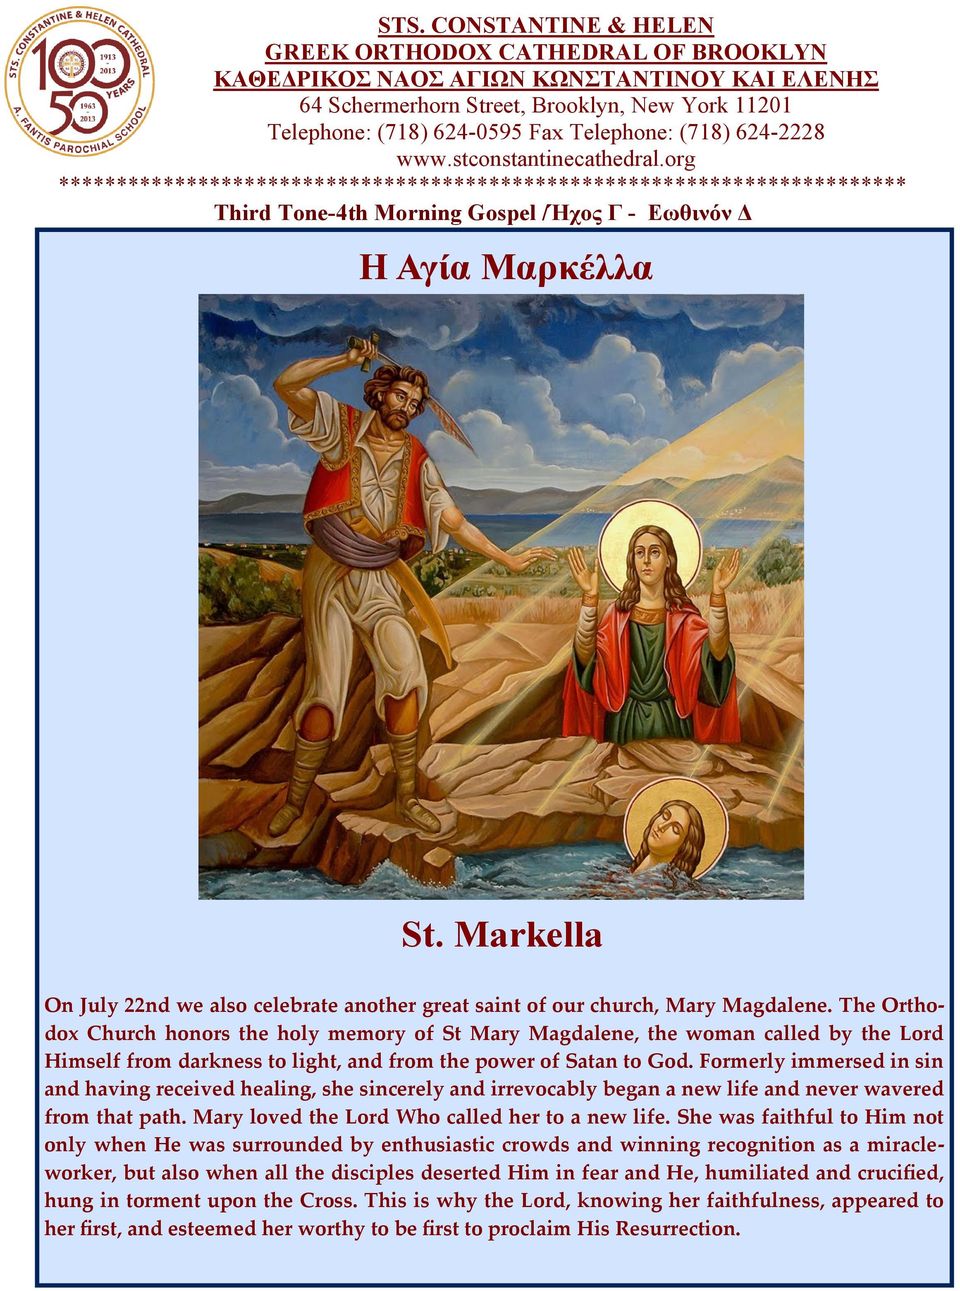 Markella On July 22nd we also celebrate another great saint of our church, Mary Magdalene.